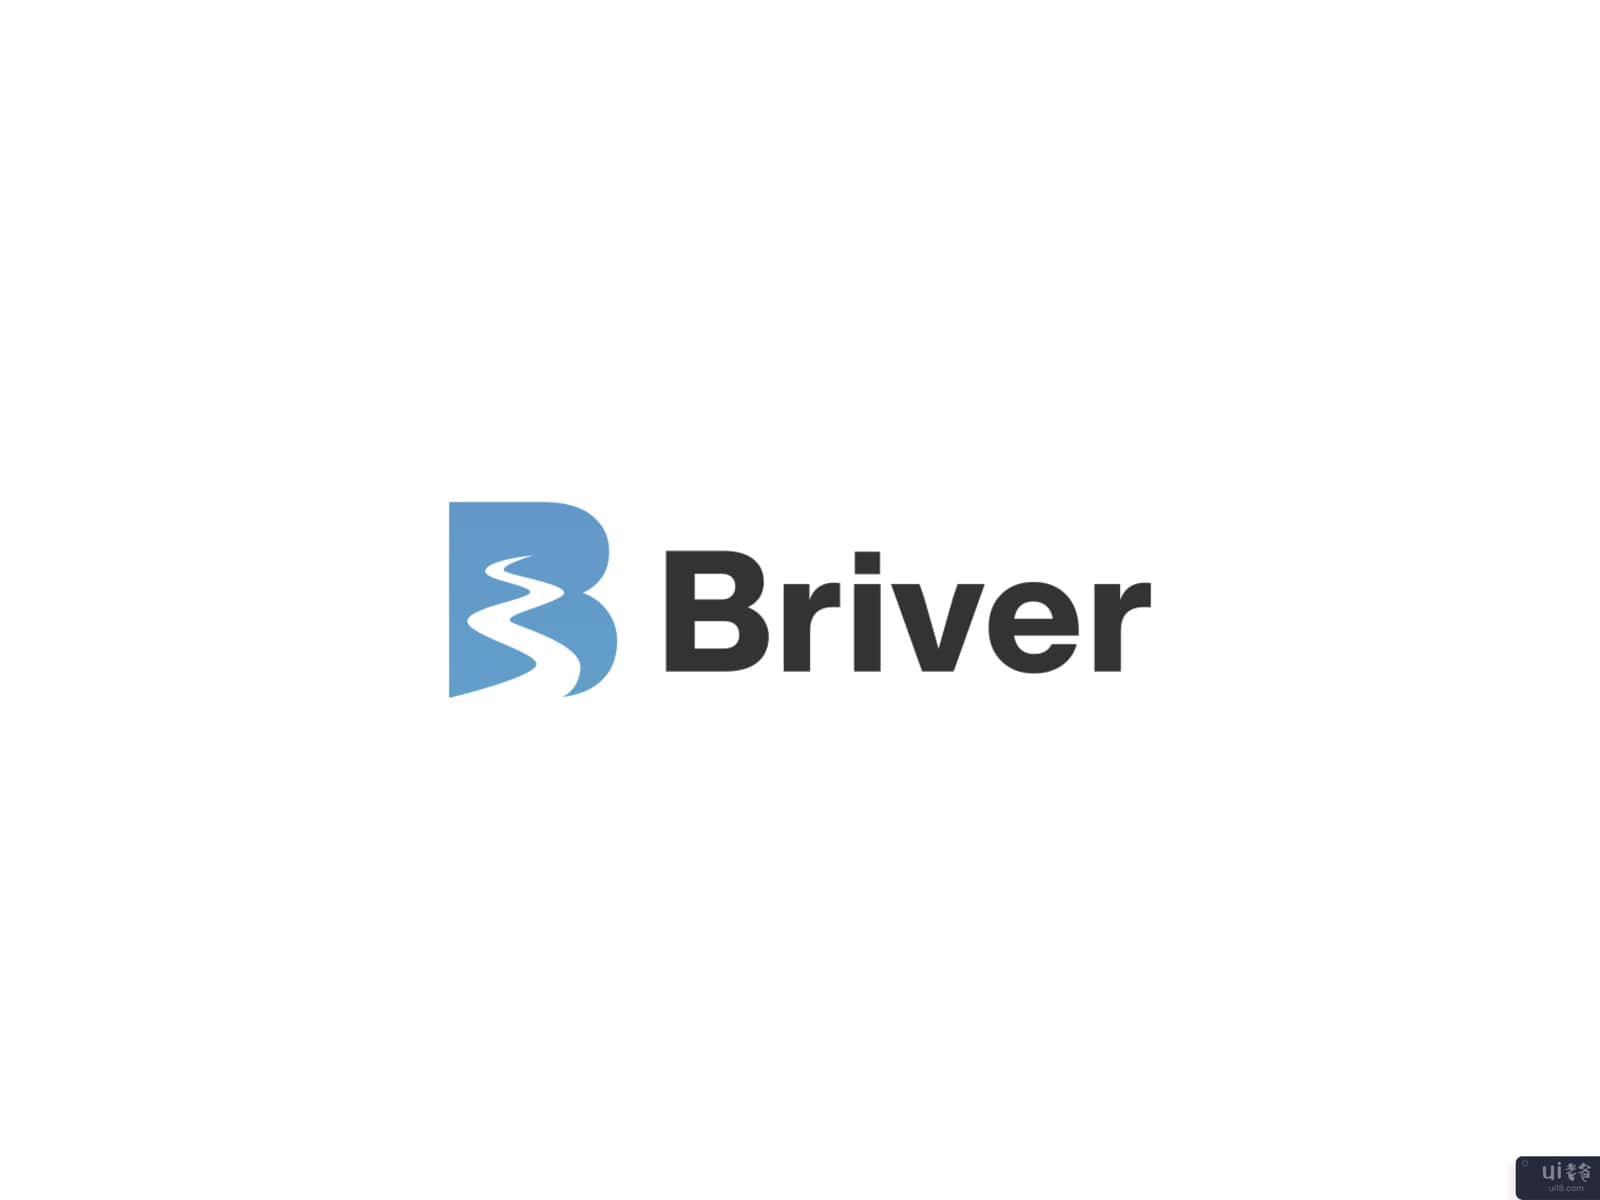 Briver/带河的字母B(Briver / Letter B with River)插图